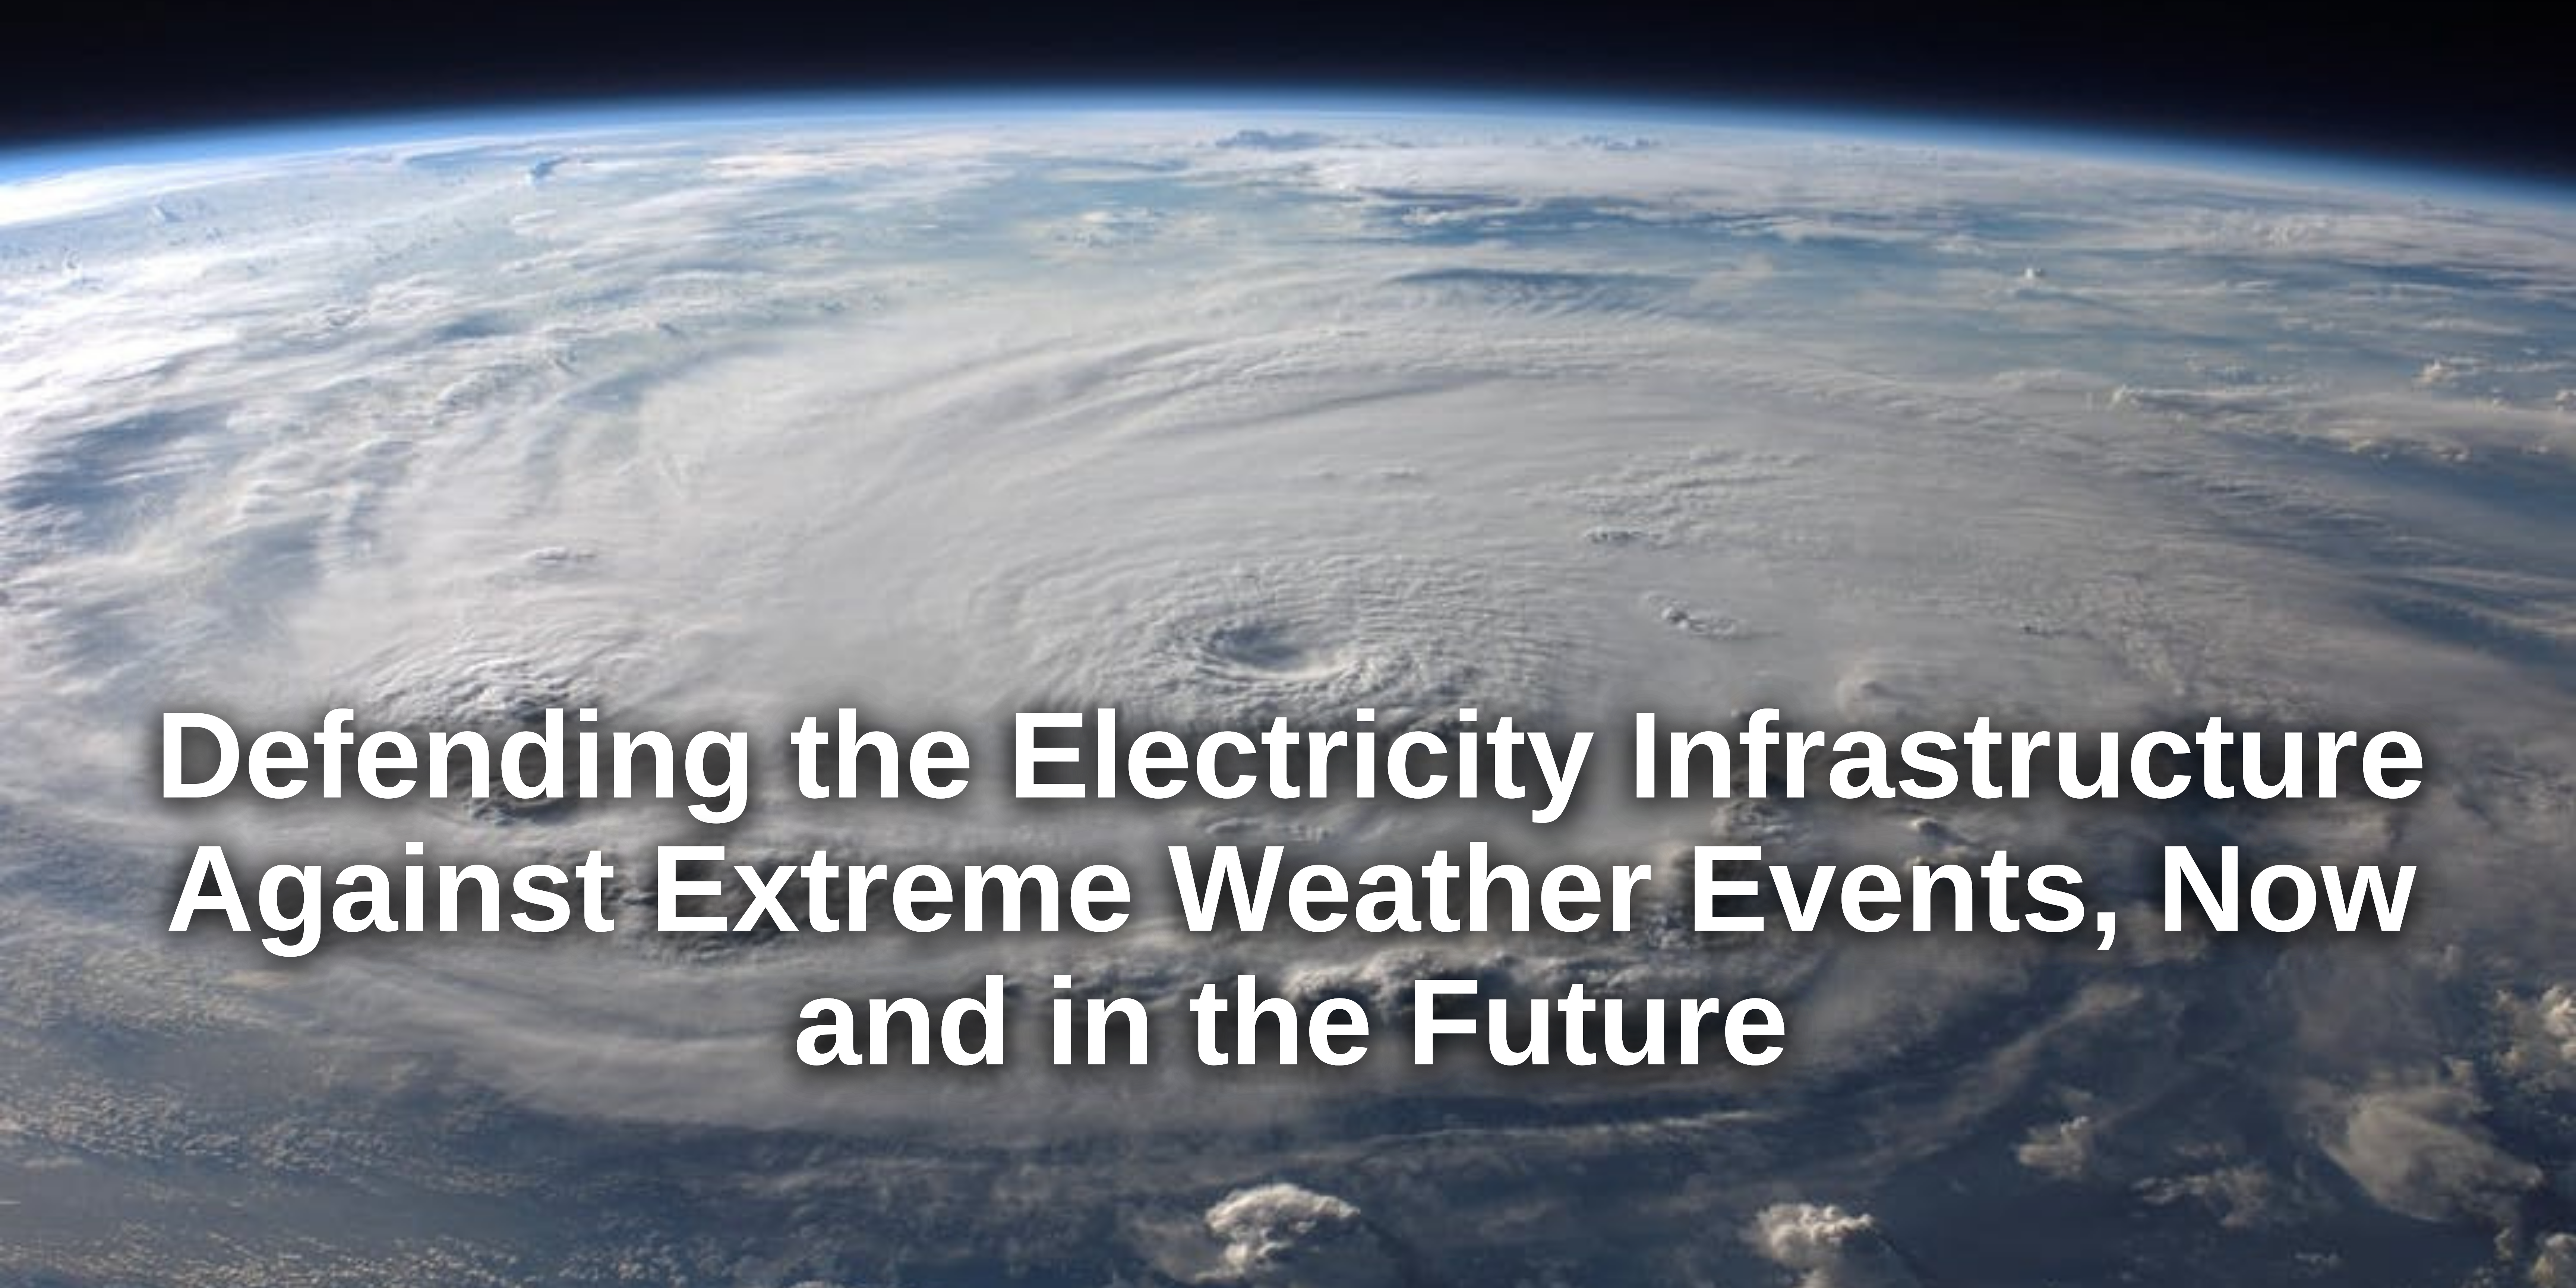 Defending the Electricity Infrastructure Against Extreme Weather Events, Now and in the Future